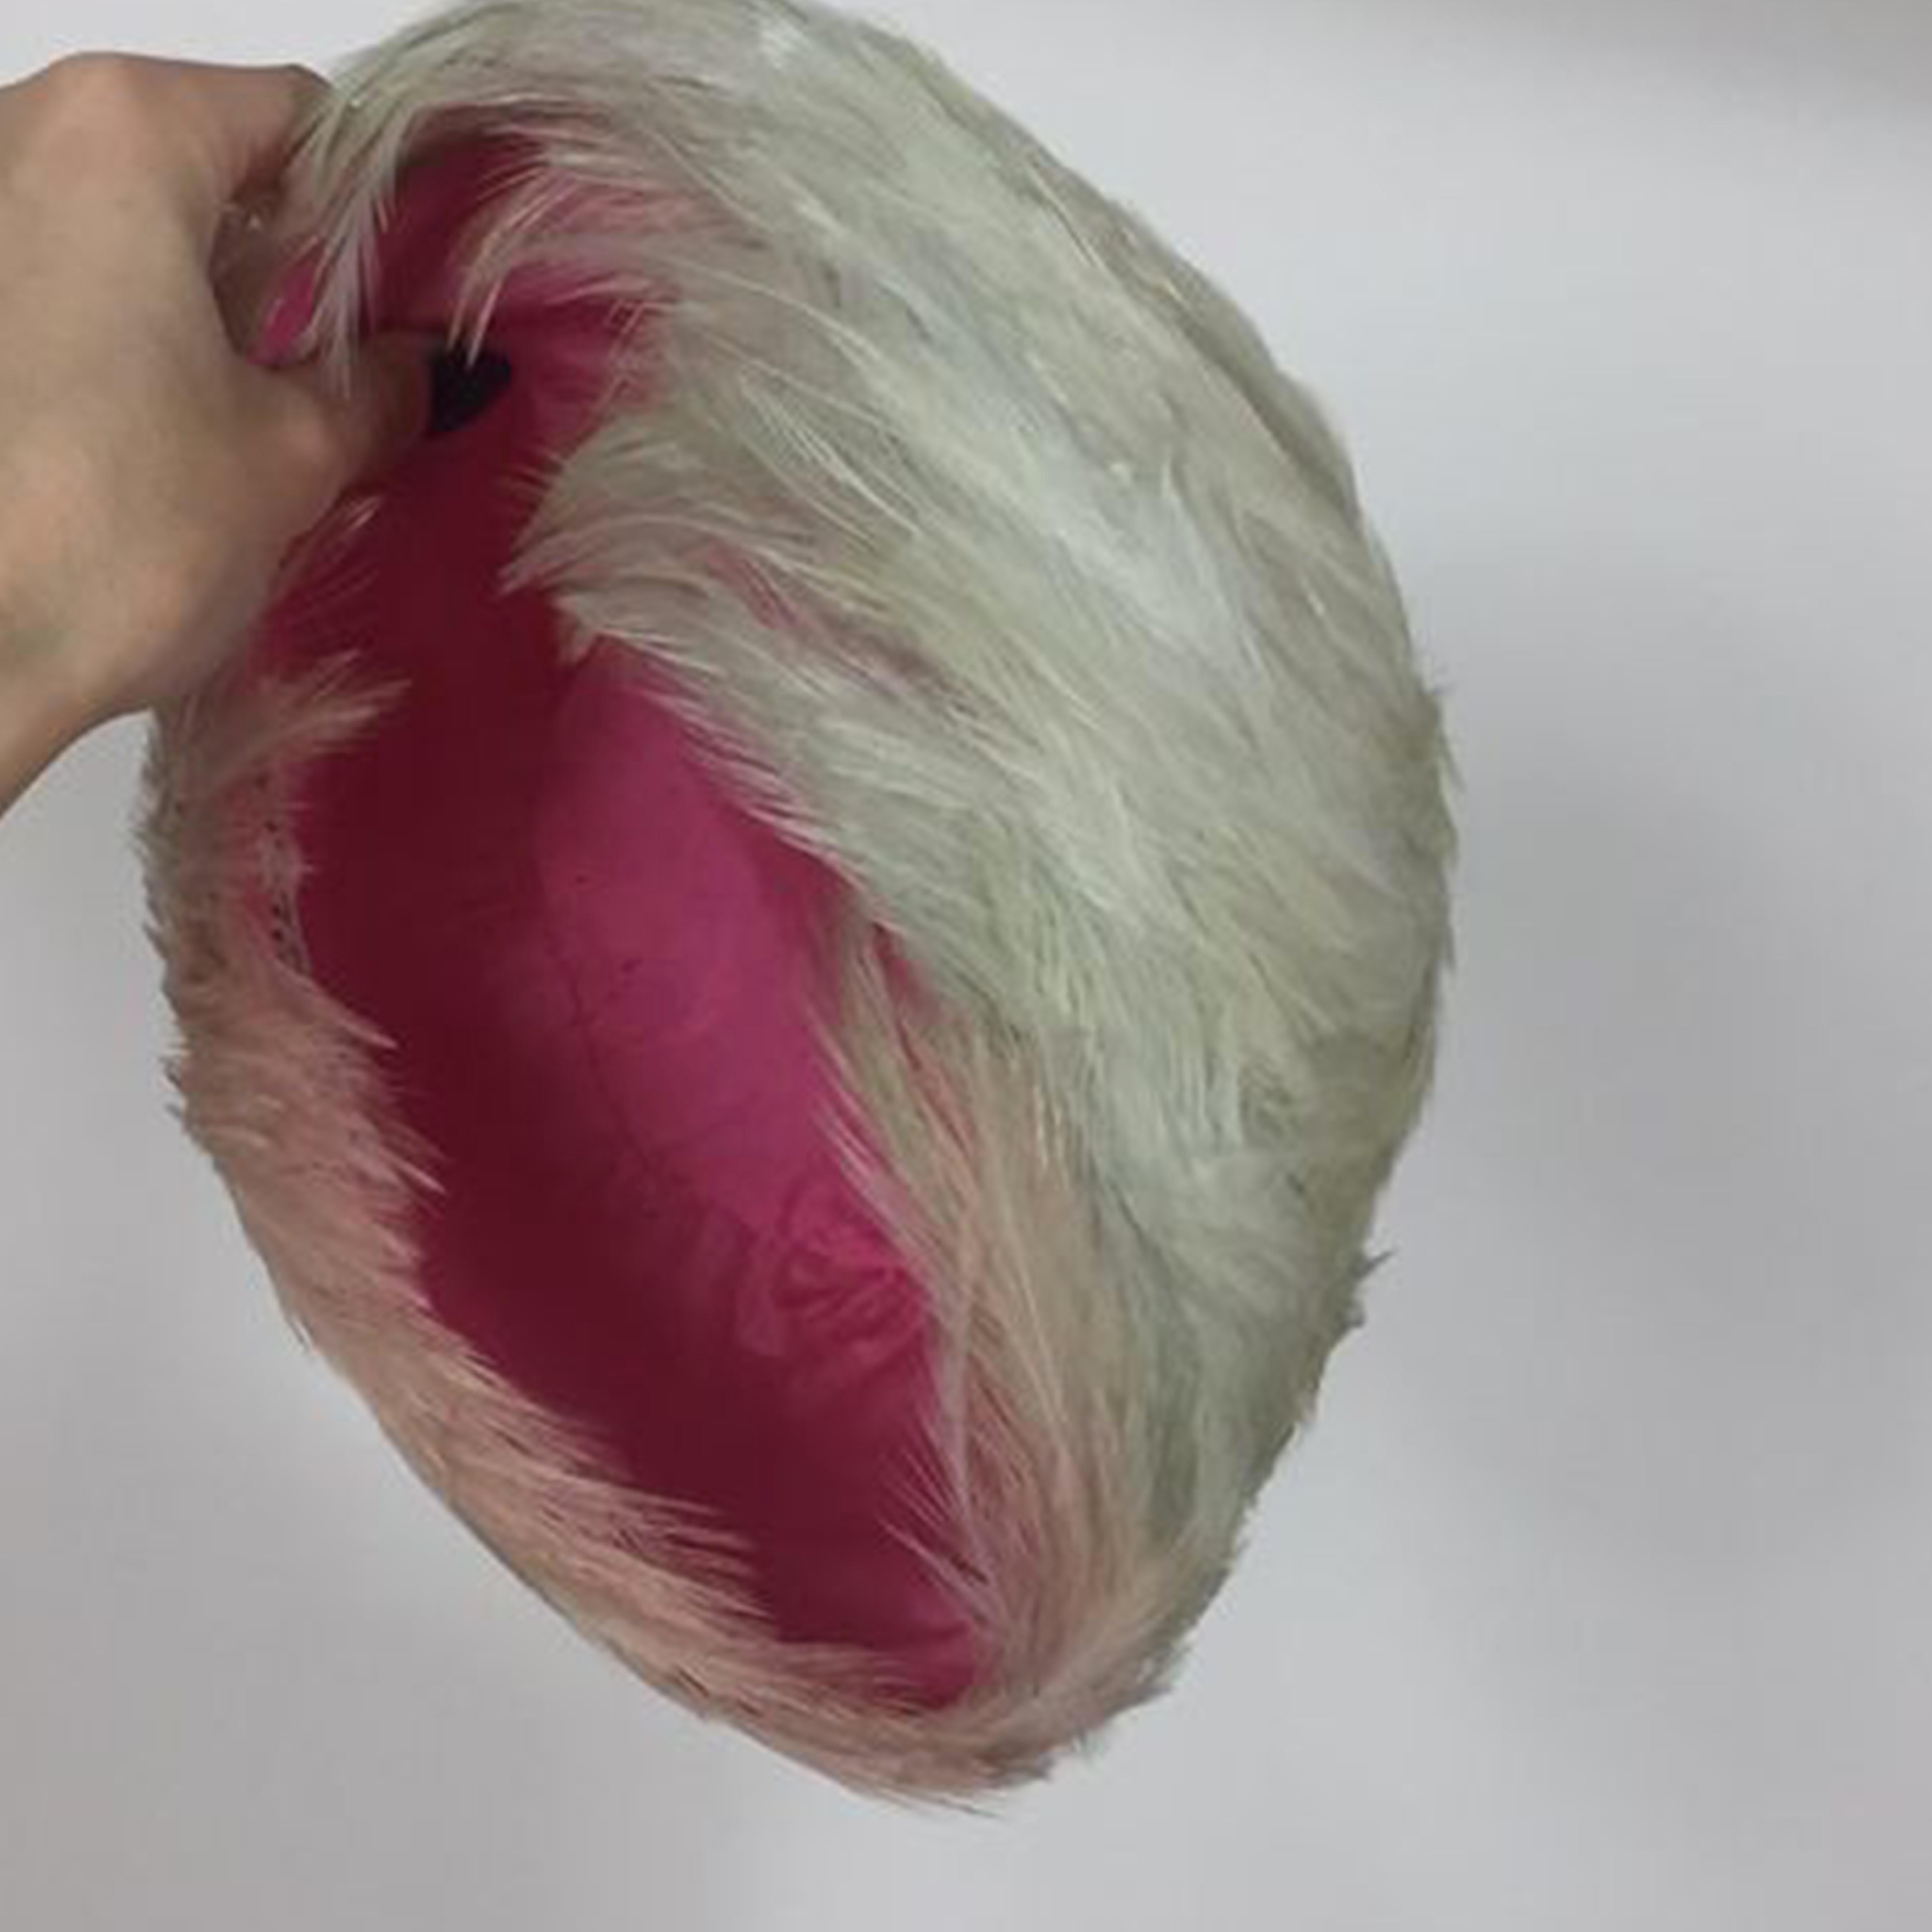 GUY LAROCHE FW1994 Feather hat In Excellent Condition For Sale In Paris, FR